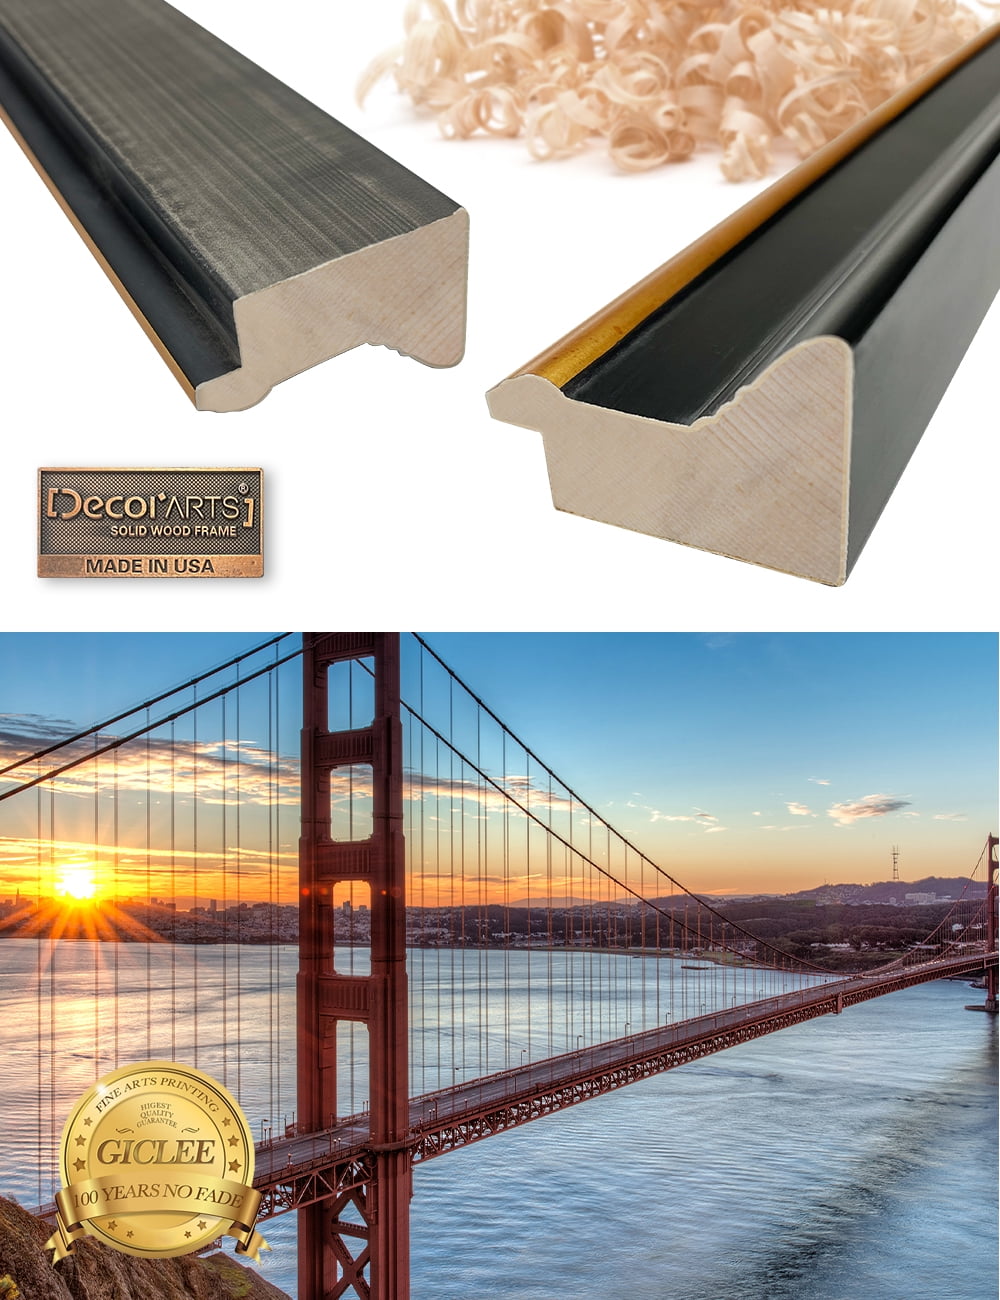 DecorArts Golden Gate Bridge San Francisco Califonia, Giclee Print on  Acid Free Cotton Canvas with Matching Classical Solid Wood Frame. Total  Size w/Frame: 39.25x27.25